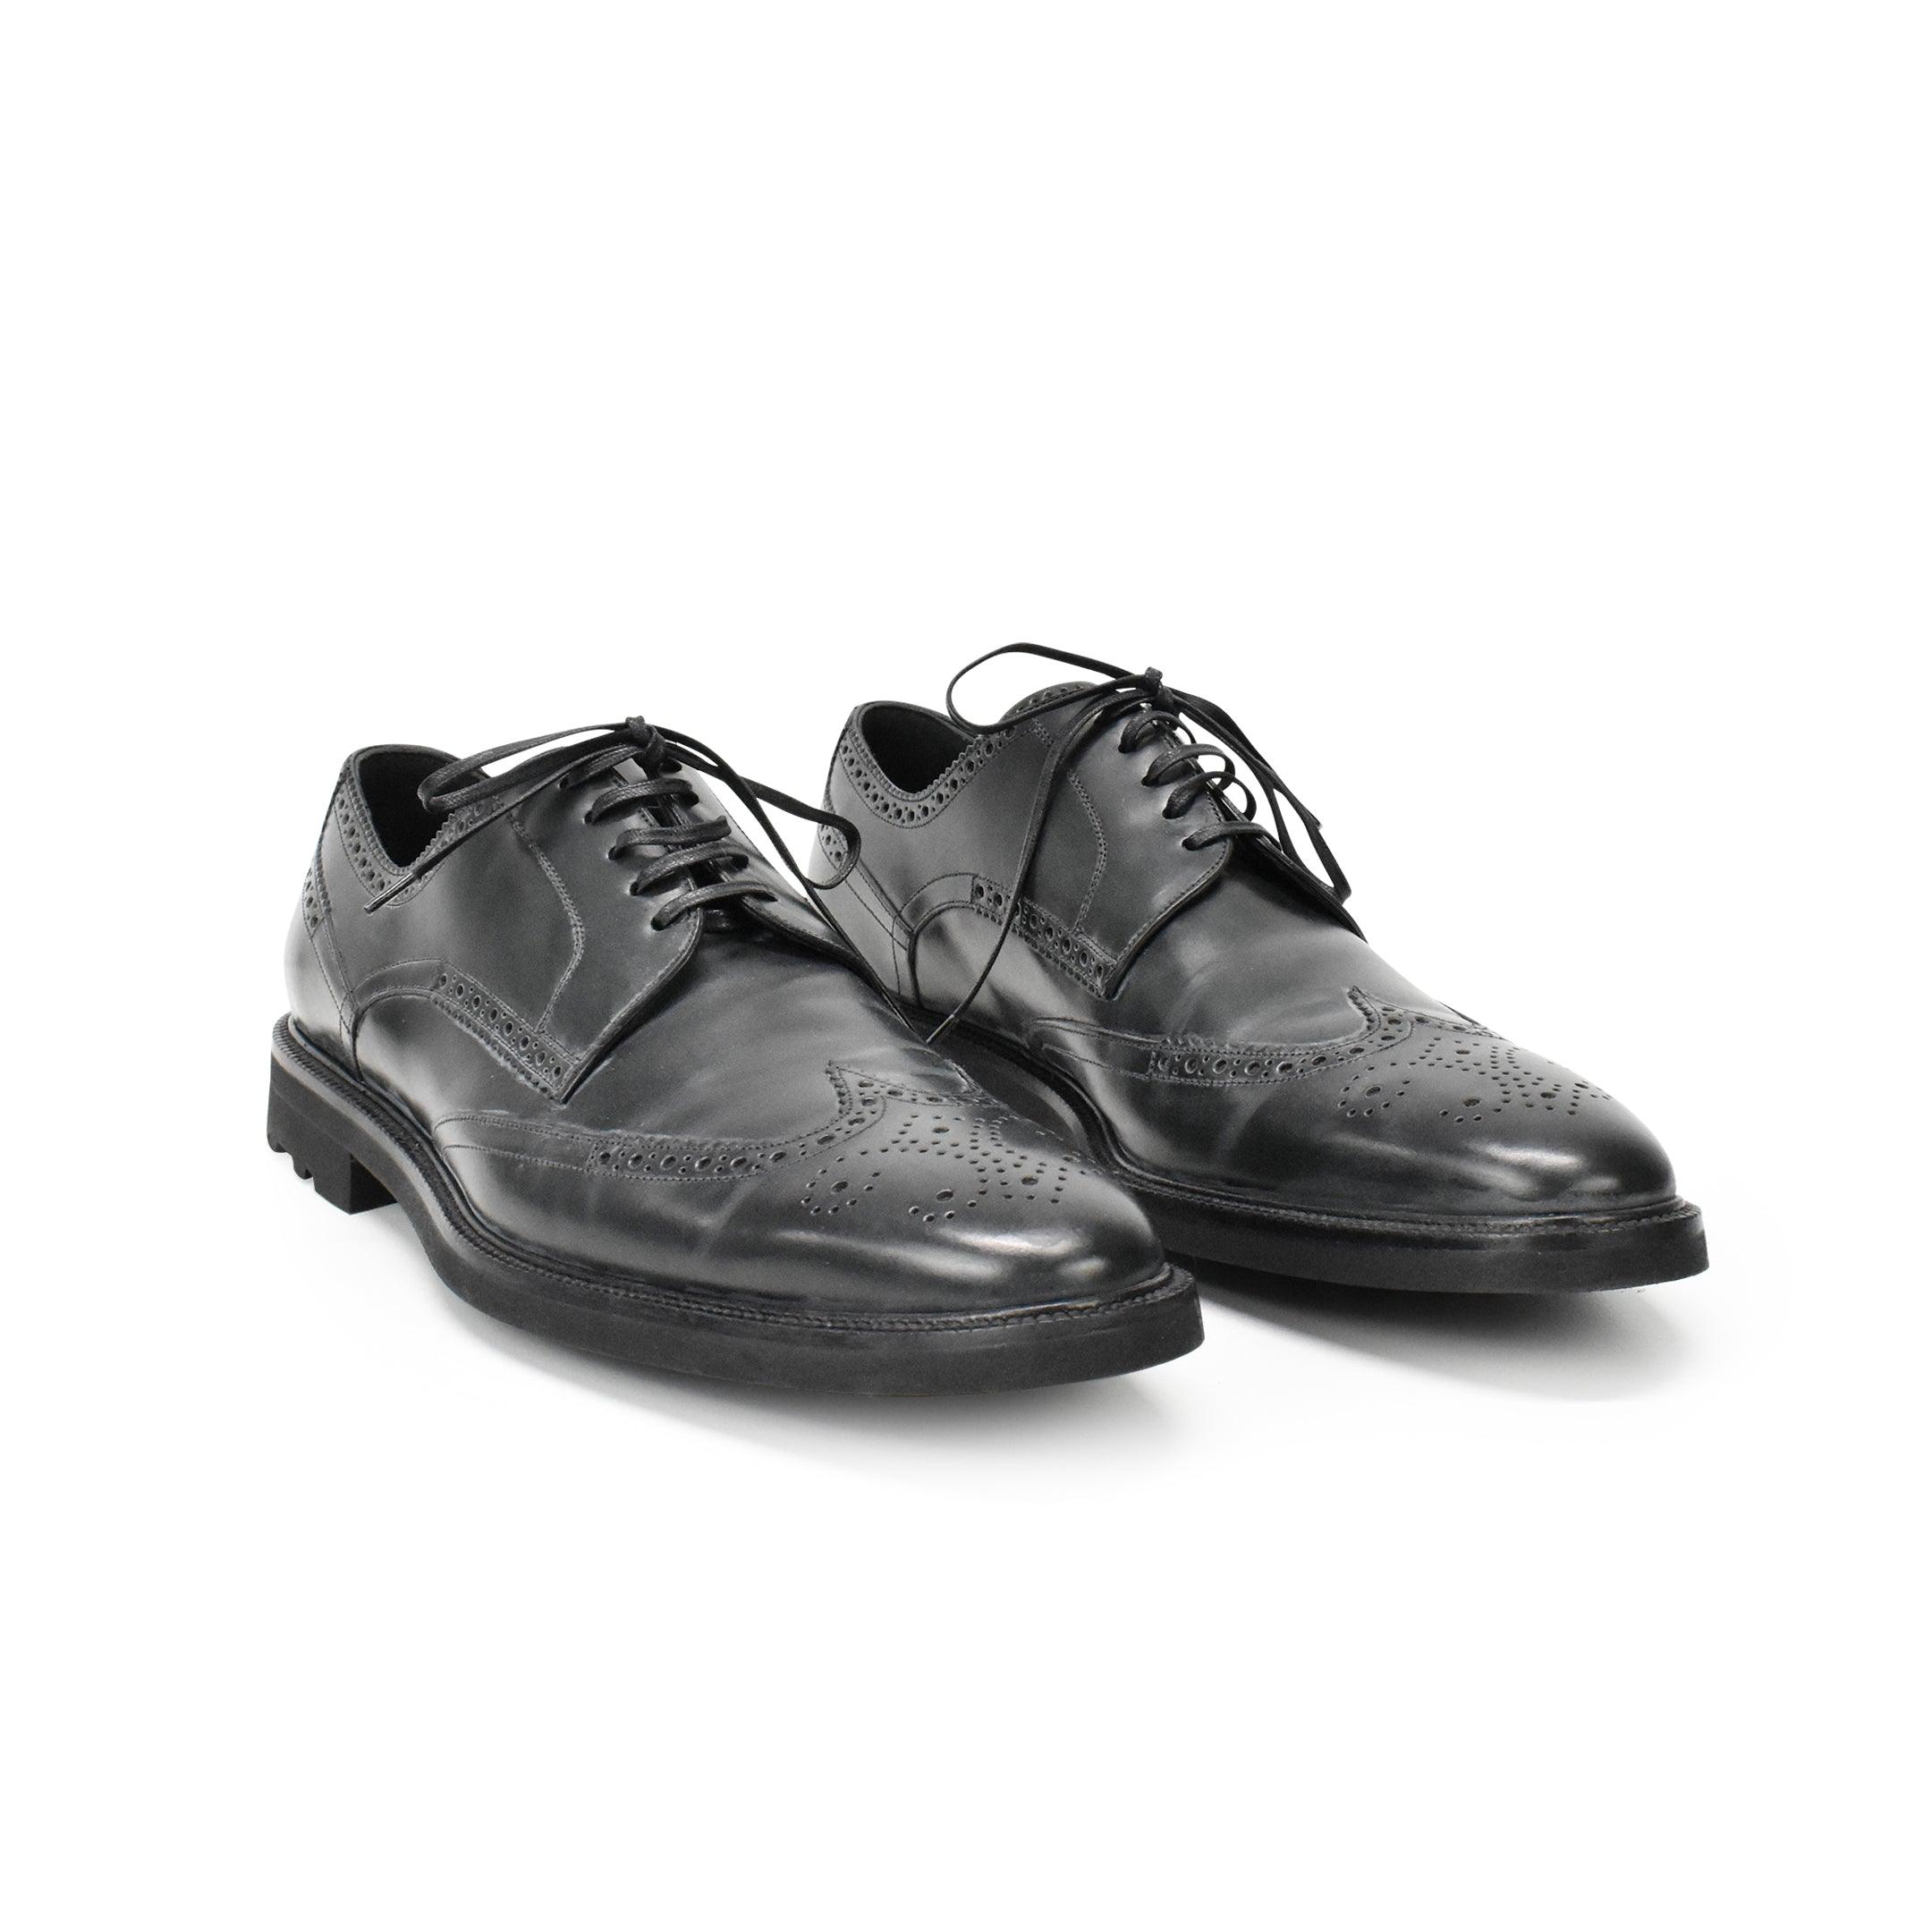 Dolce & Gabbana Oxford Dress Shoes - Men's 9.5 - Fashionably Yours